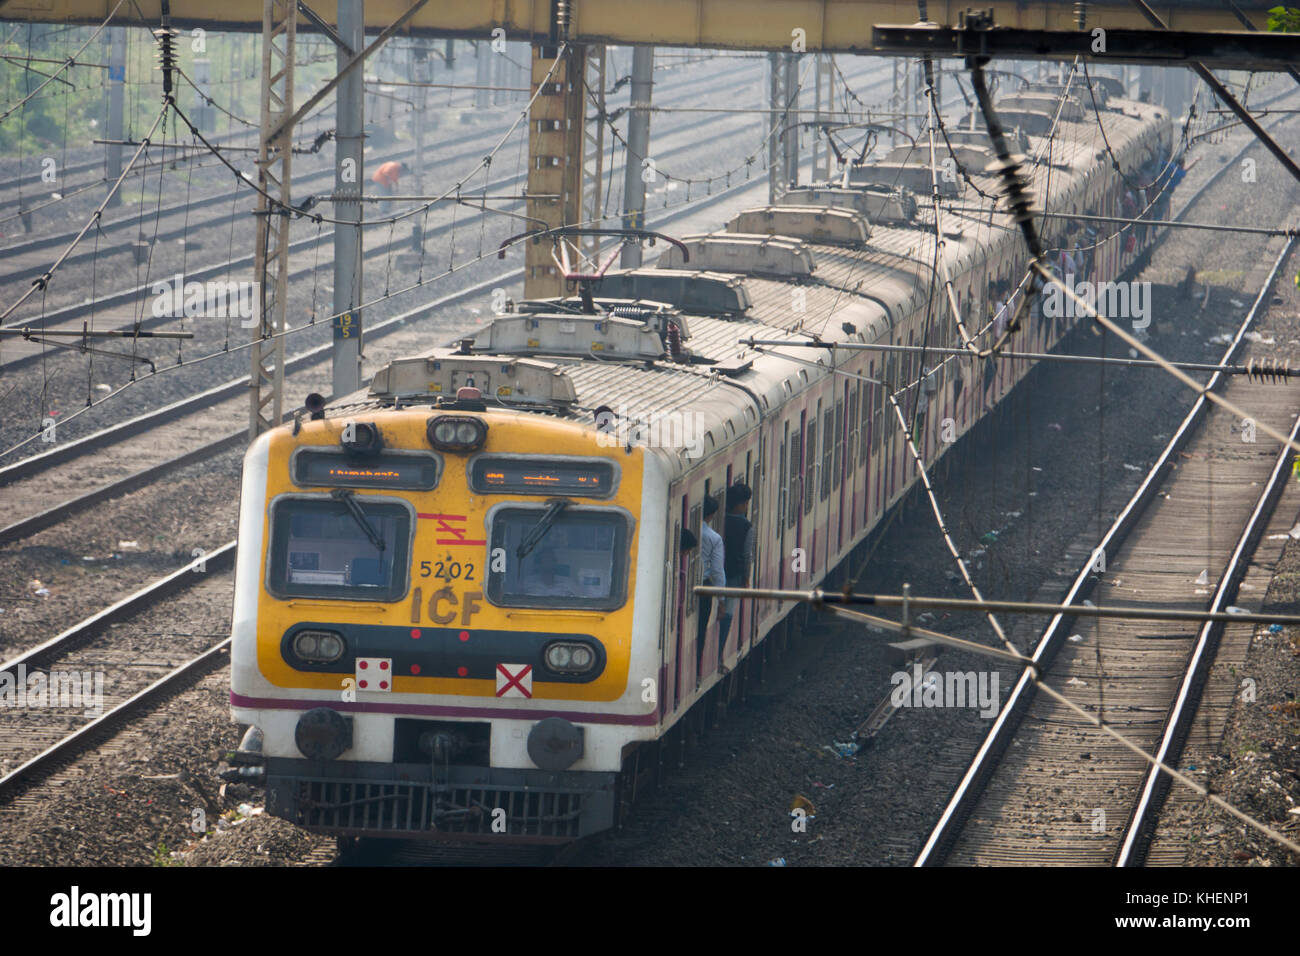 Commuter train and passengers at Vile Parle station on the Mumbai Suburban Railway network Stock Photo